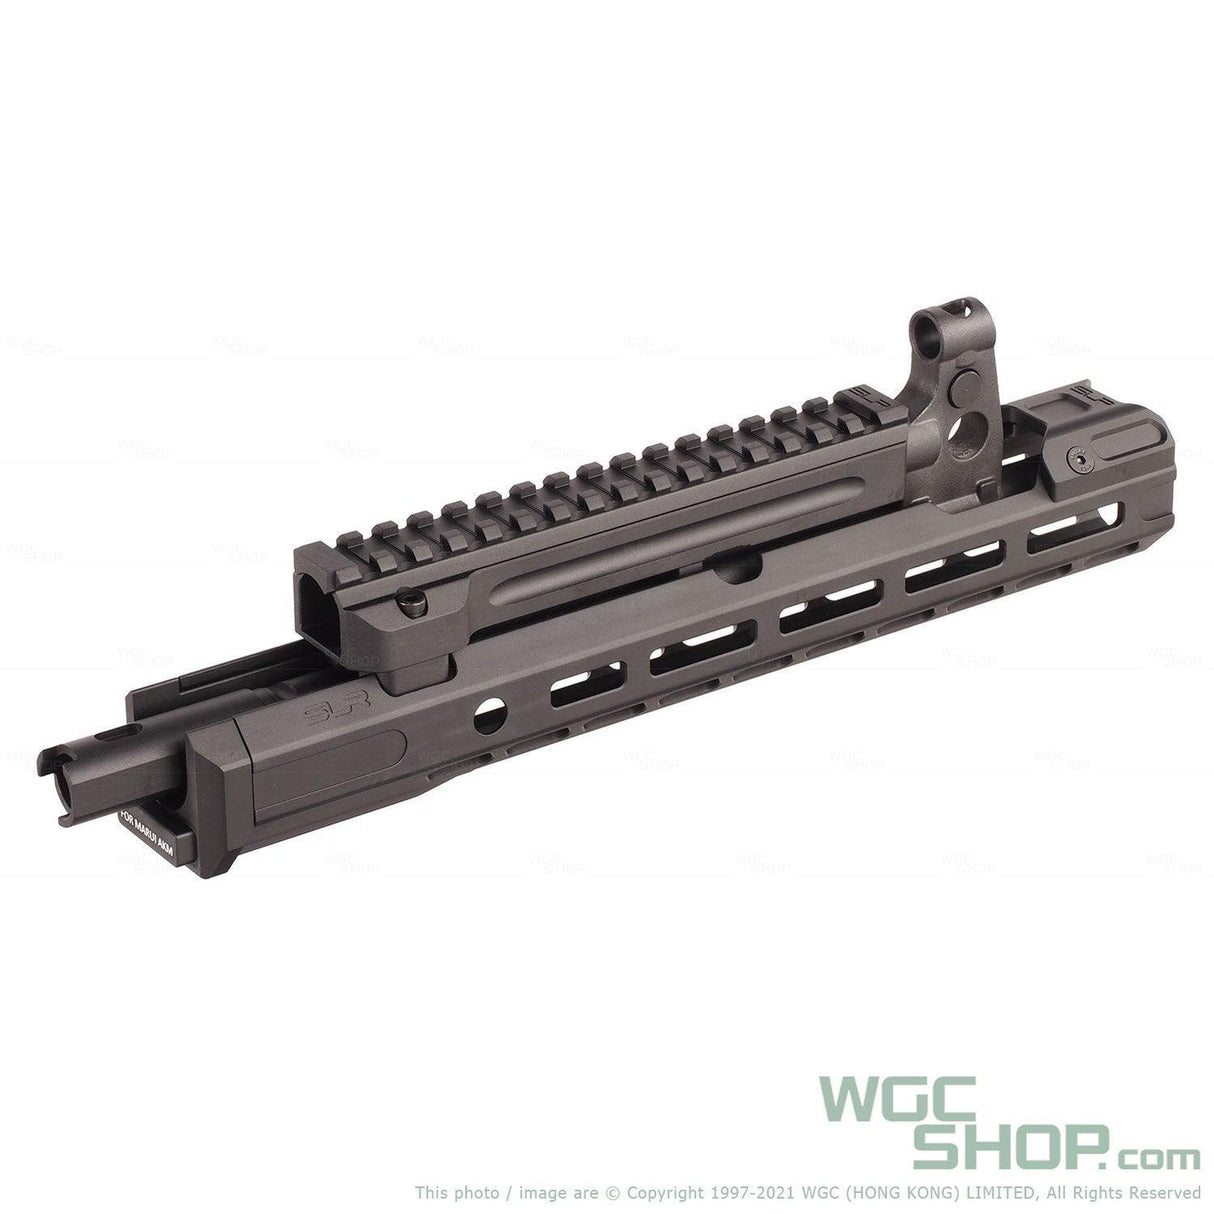 DYTAC SLR Airsoftworks 11.2 Inch Light M-Lok EXT Conversion Kit for Marui AKM GBB Airsoft - WGC Shop